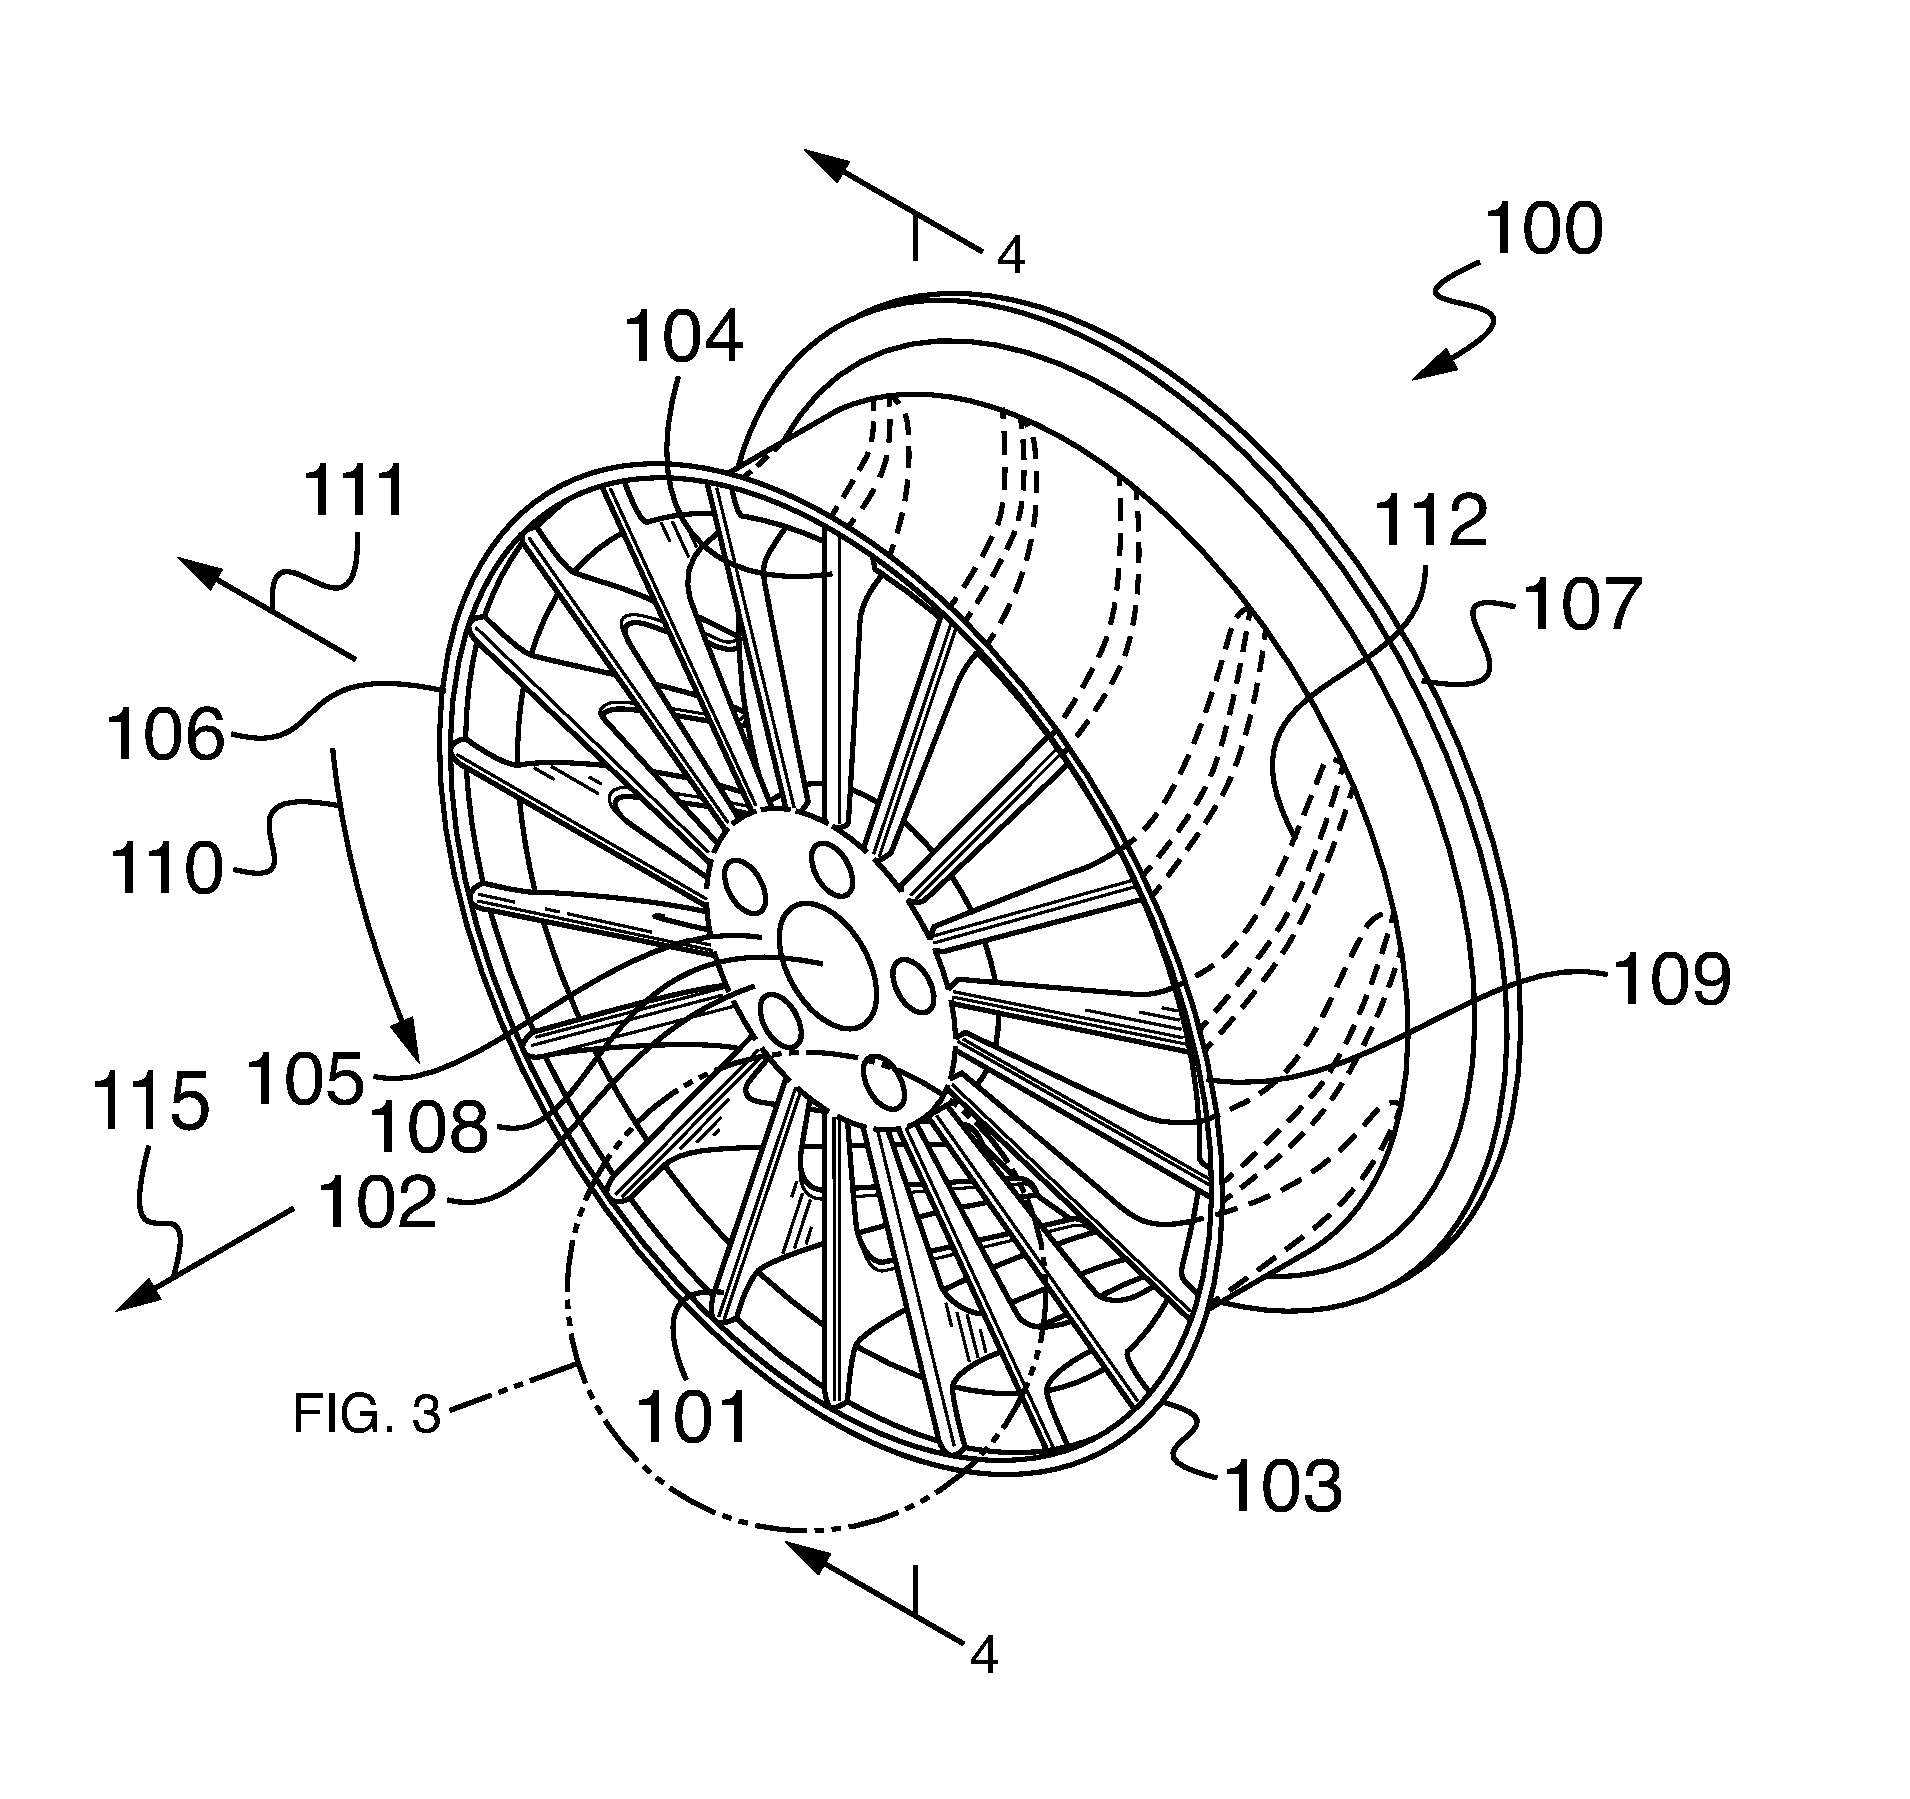 Rim, airless tire and hubcap designs configured to directionally convey air and methods for their use